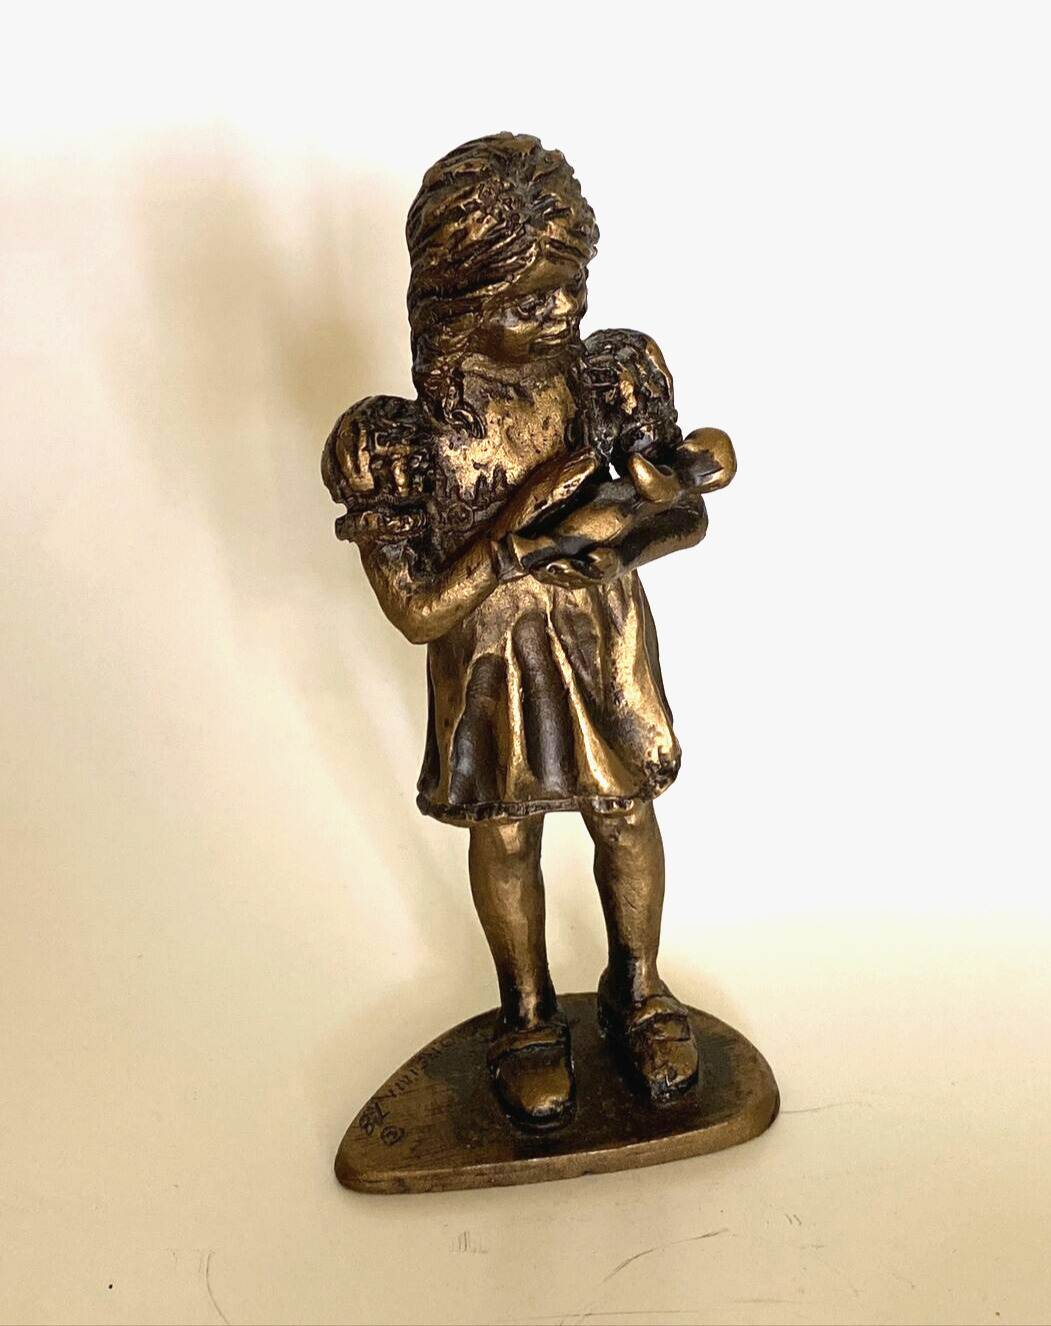 Vintage Girl With Baby Doll Cast  Metal Figure With Bronze Finish Statue 4.25”